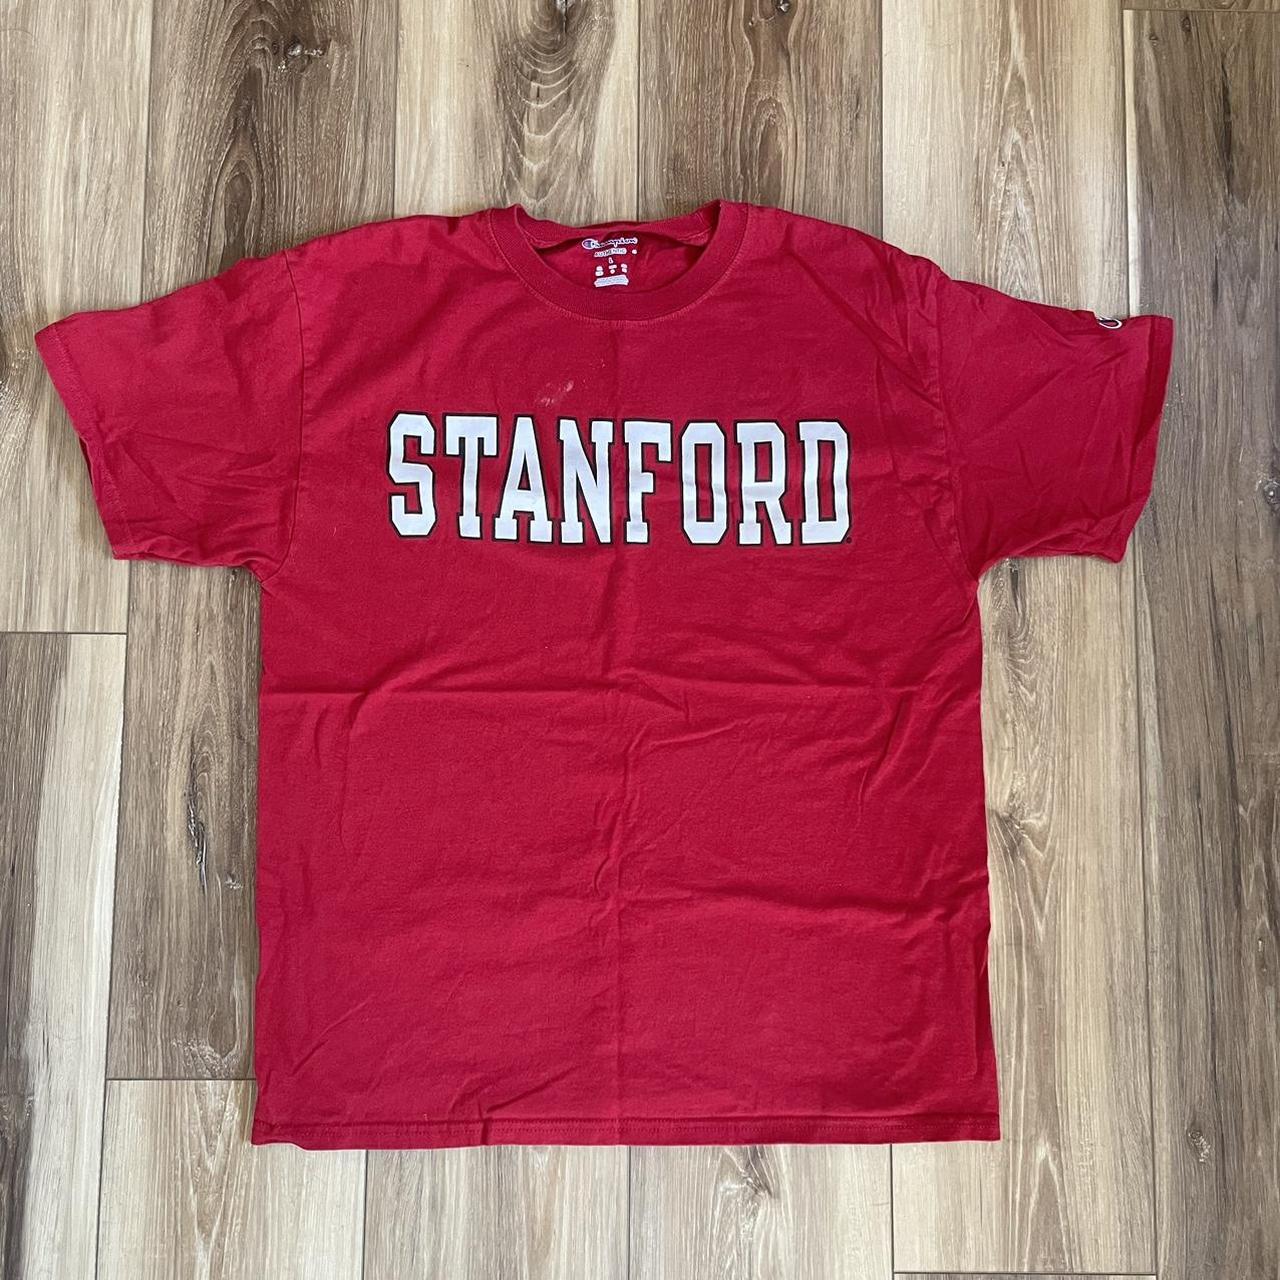 Stanford Has some stains - 3rd pic Size large - Depop